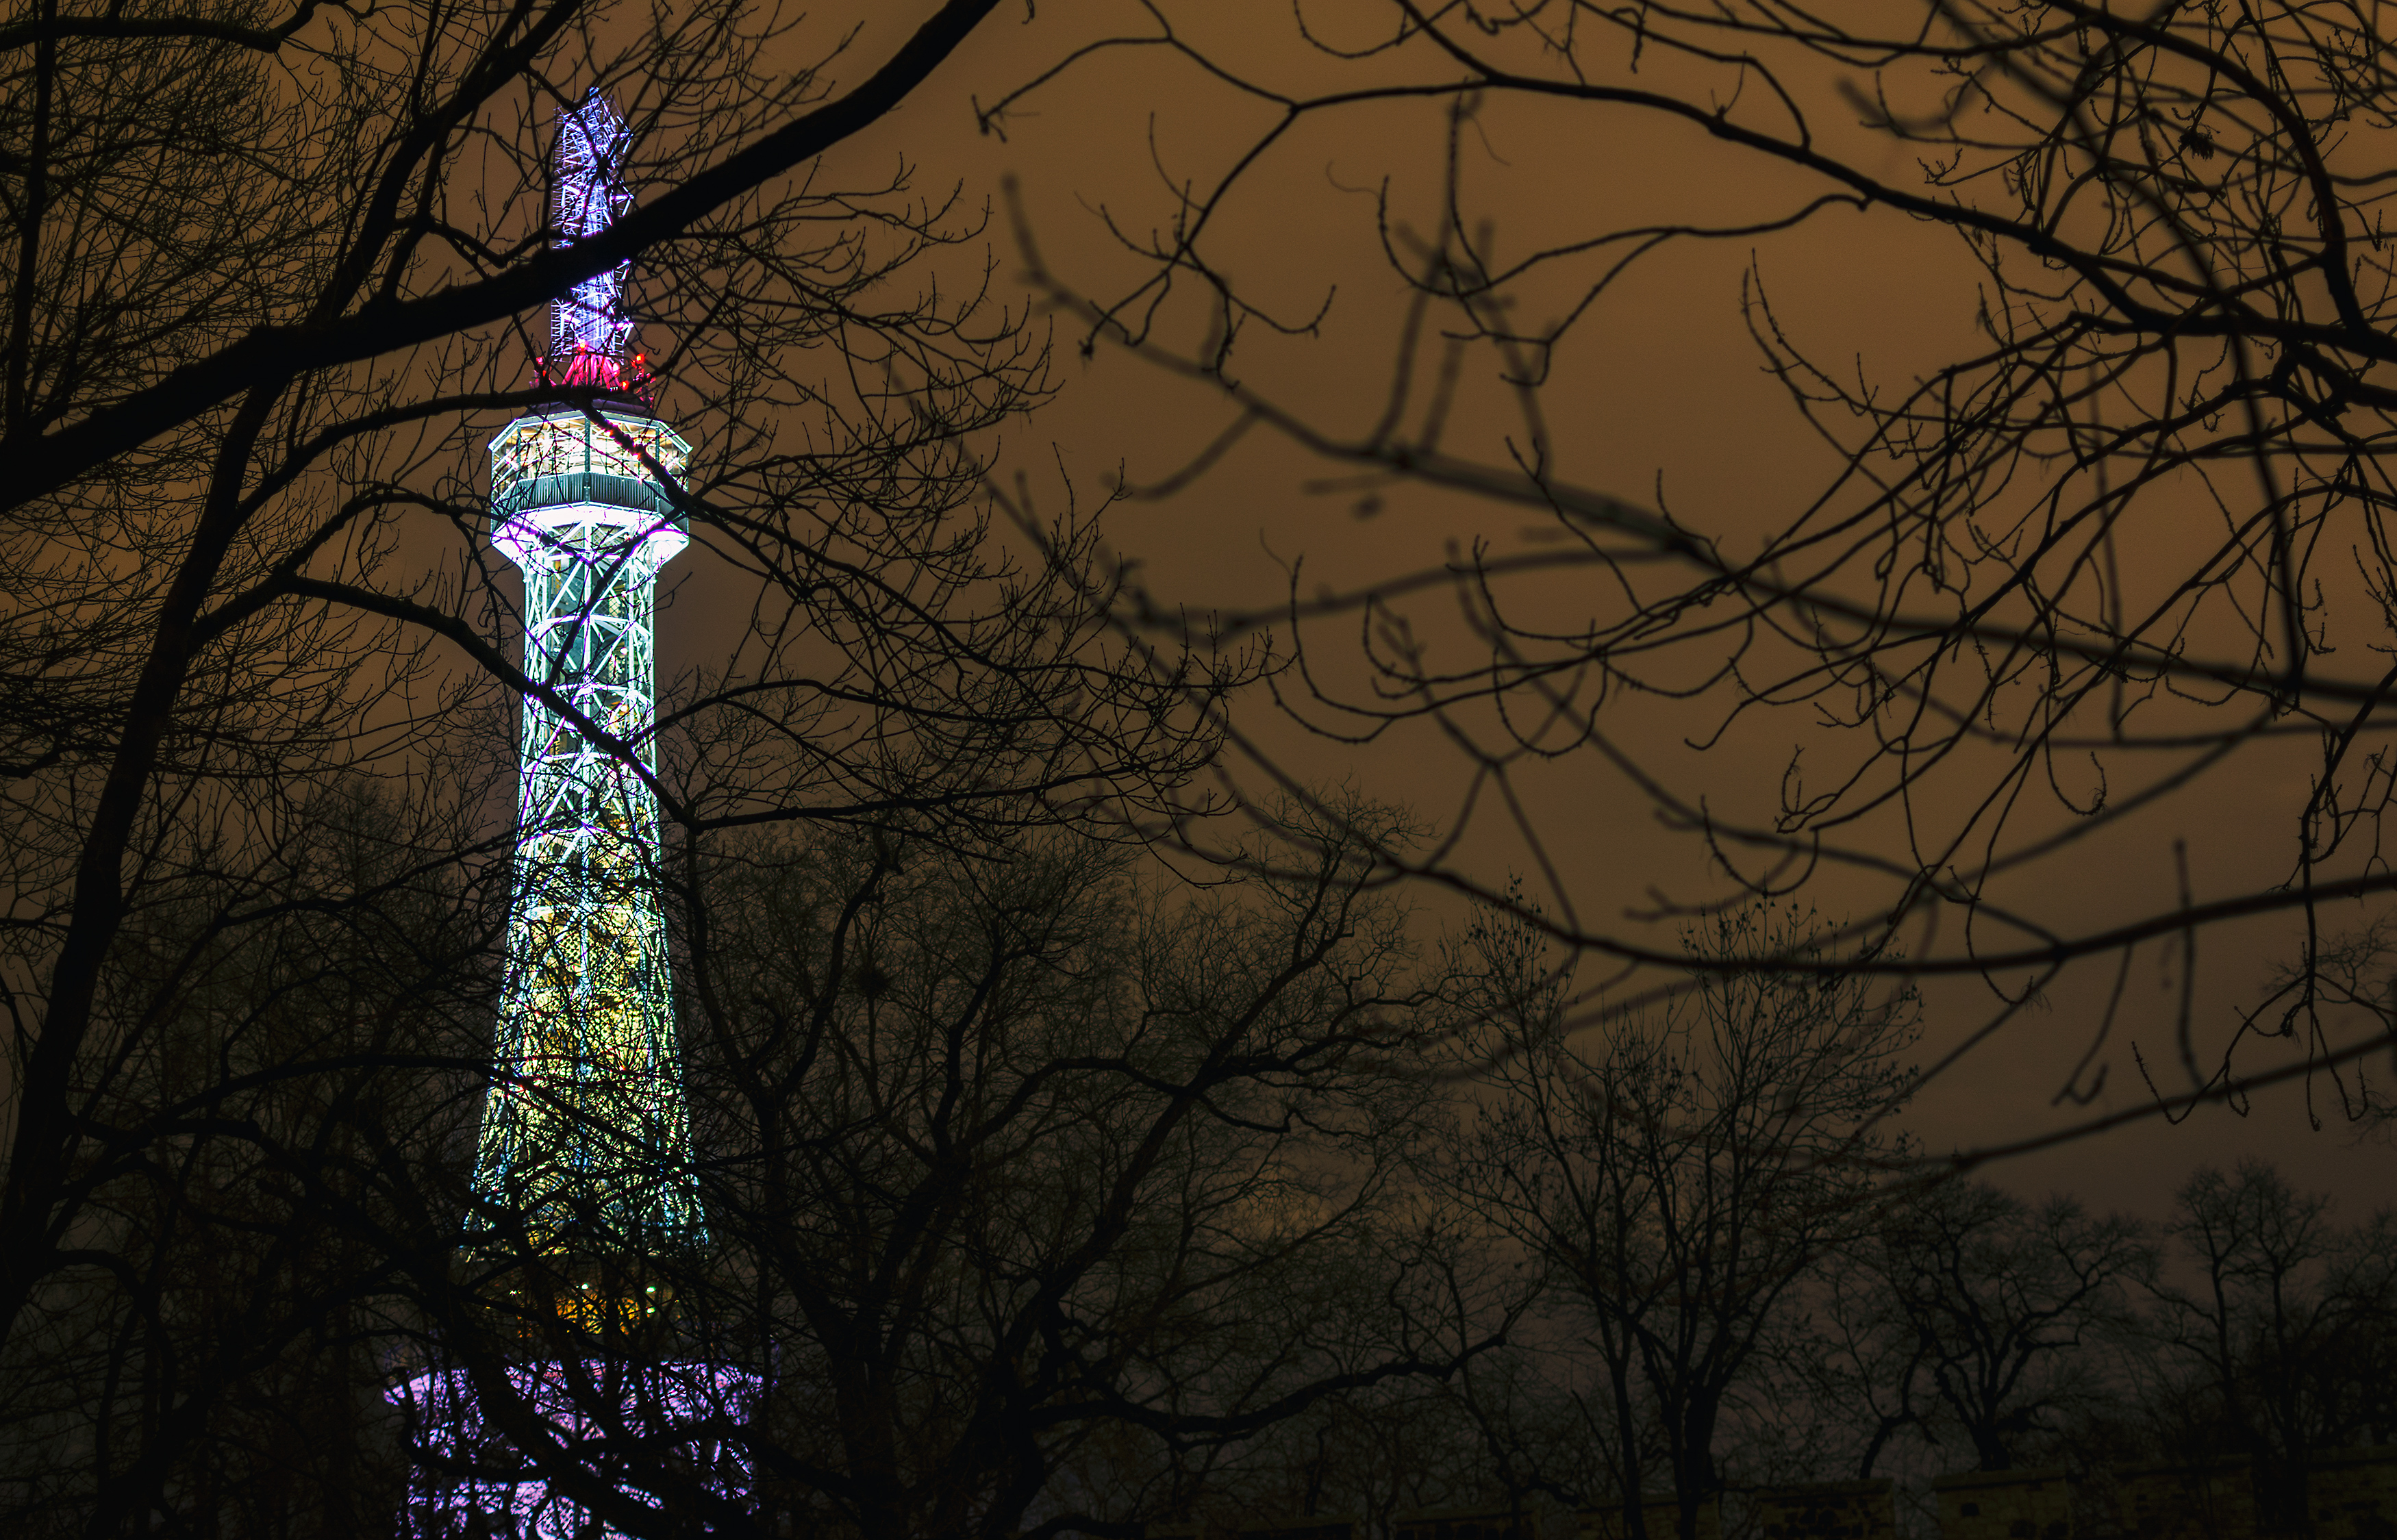 Free Image: Petřín Lookout Tower at Night | Libreshot Public Domain ...